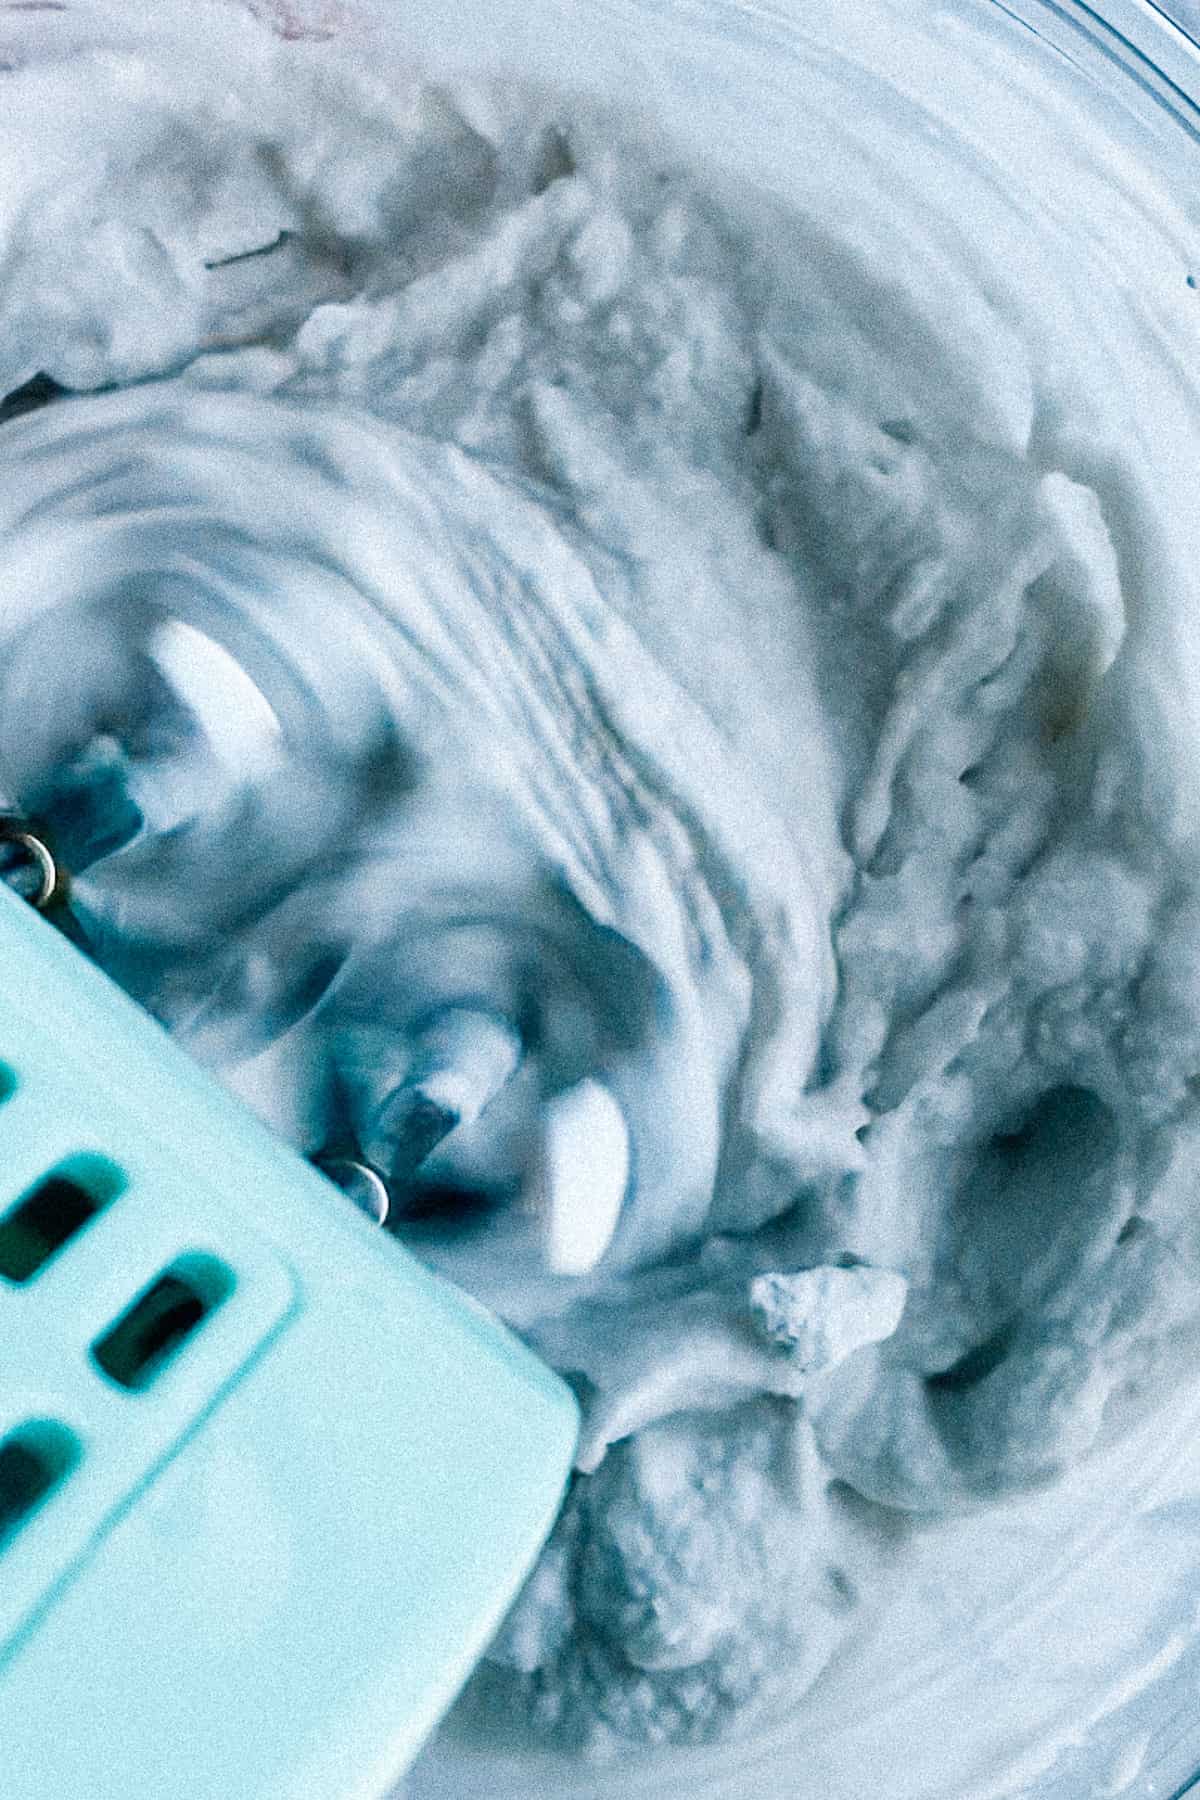 whipping coconut cream with electric whisk in a bowl